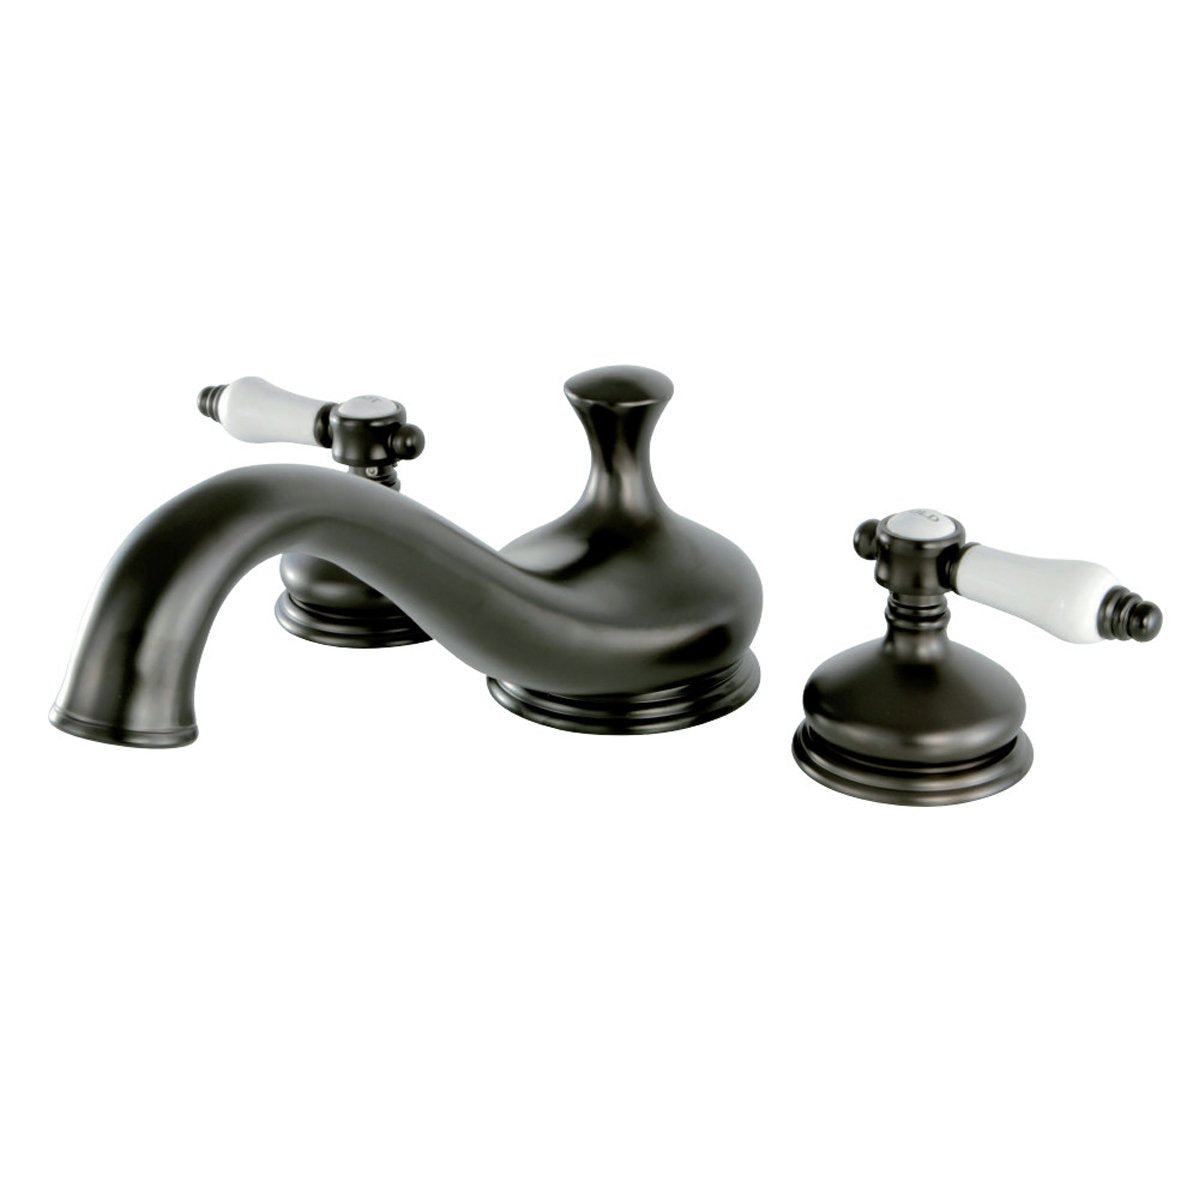 Kingston Brass Bel-Air Deck Mount Roman Tub Filler with Lever Handle